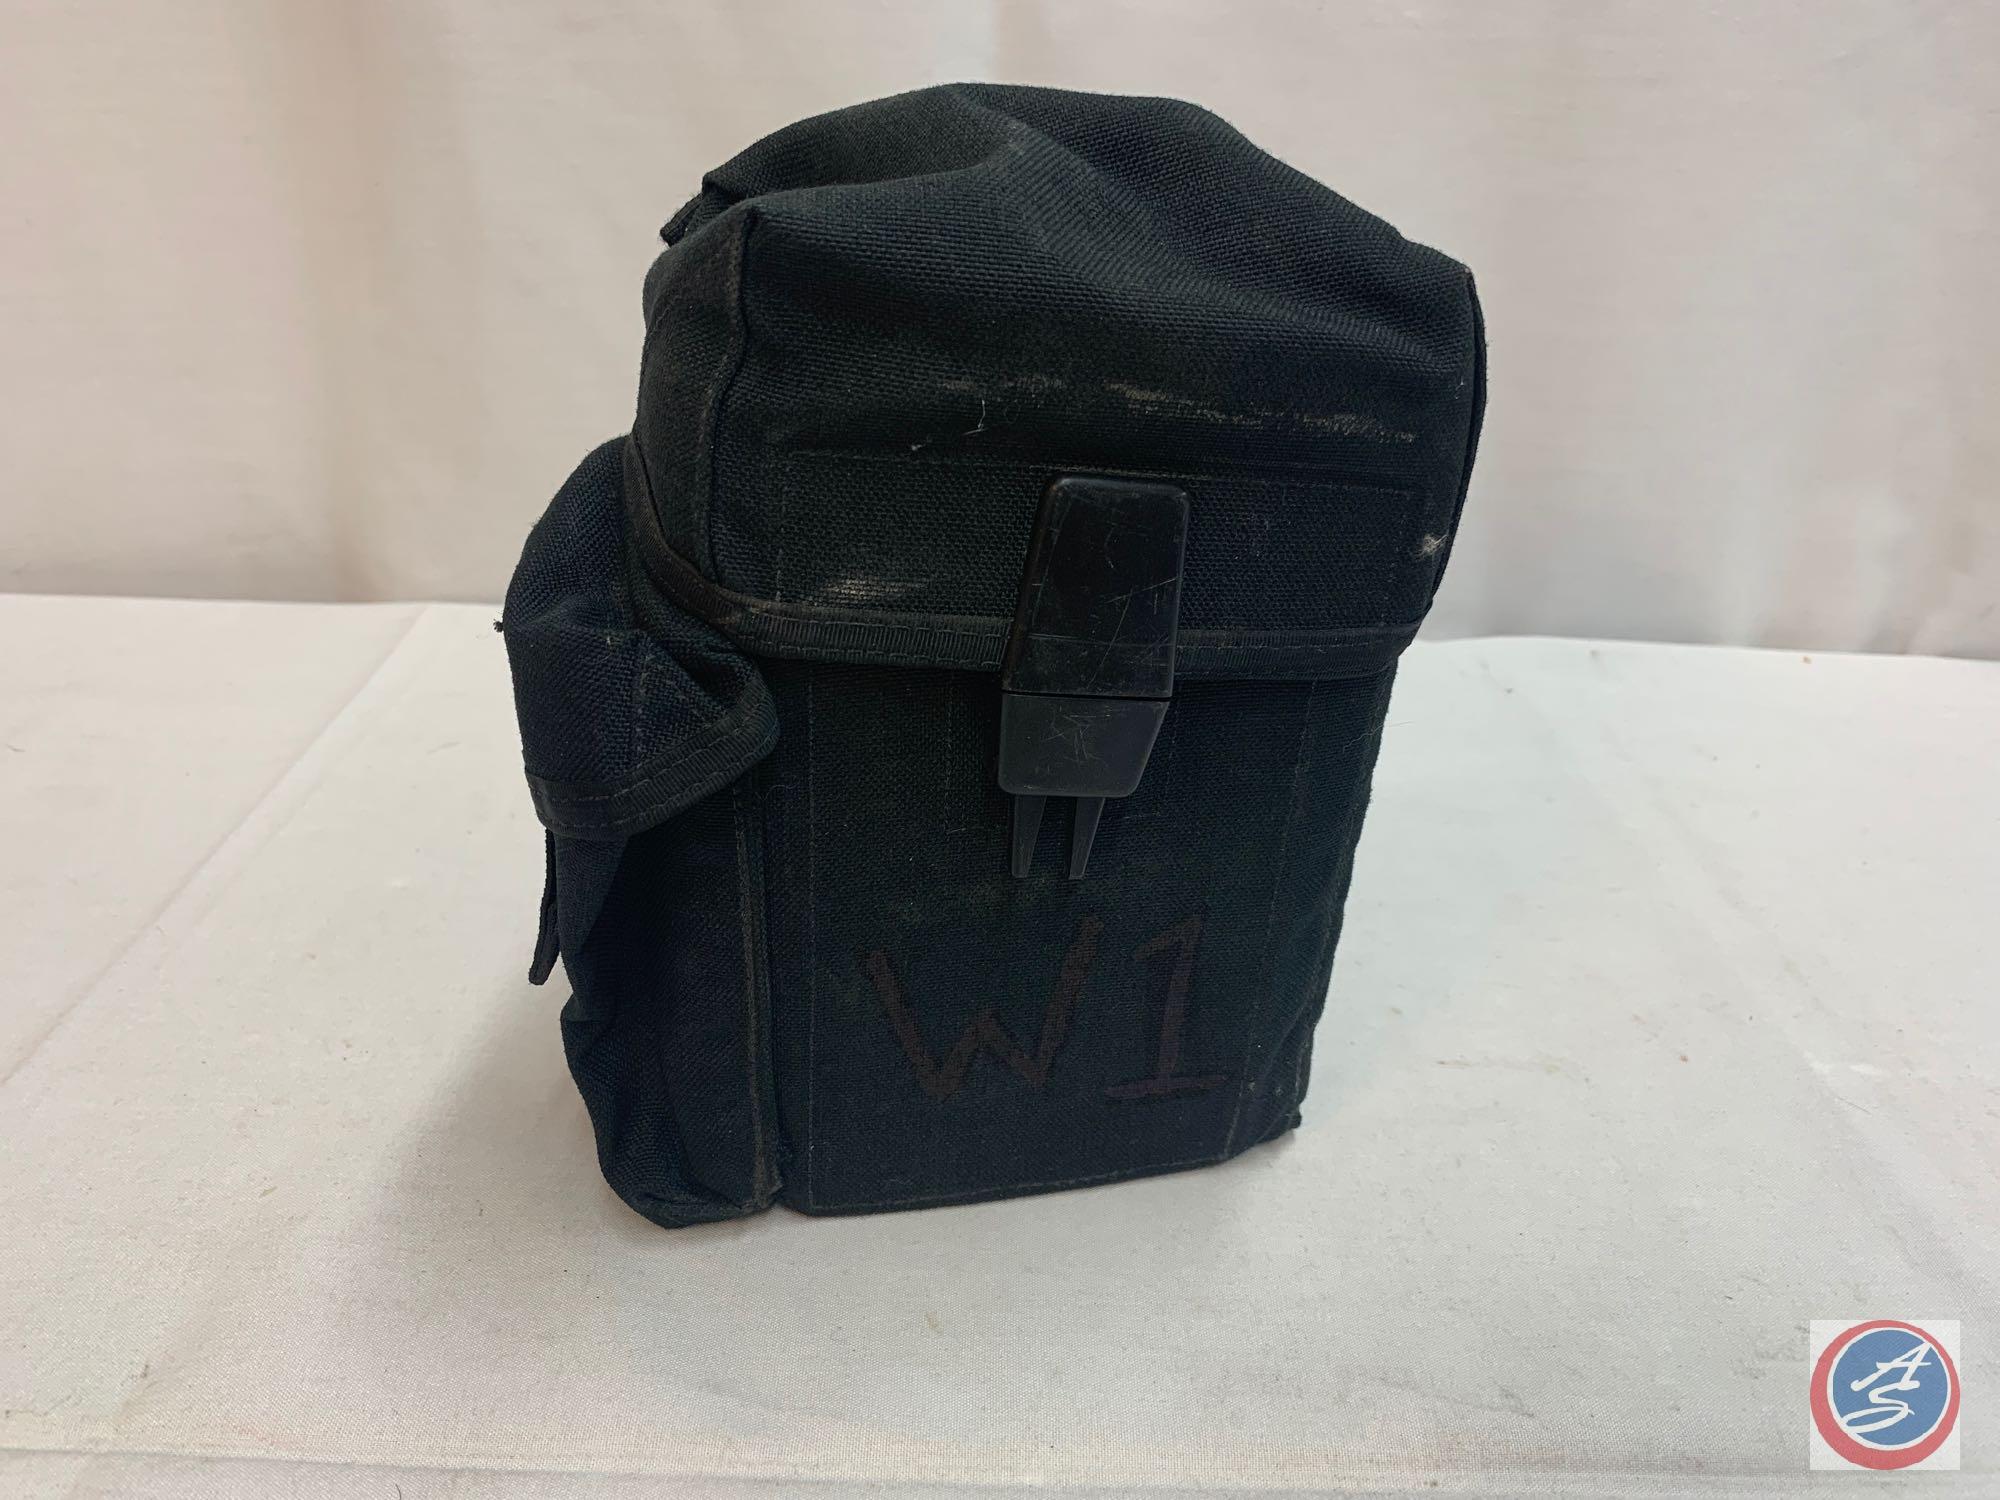 (5) PMAG 30 rd AR Magazines in Black canvas mag pouch - LE Consignment - Used Condition Varies.